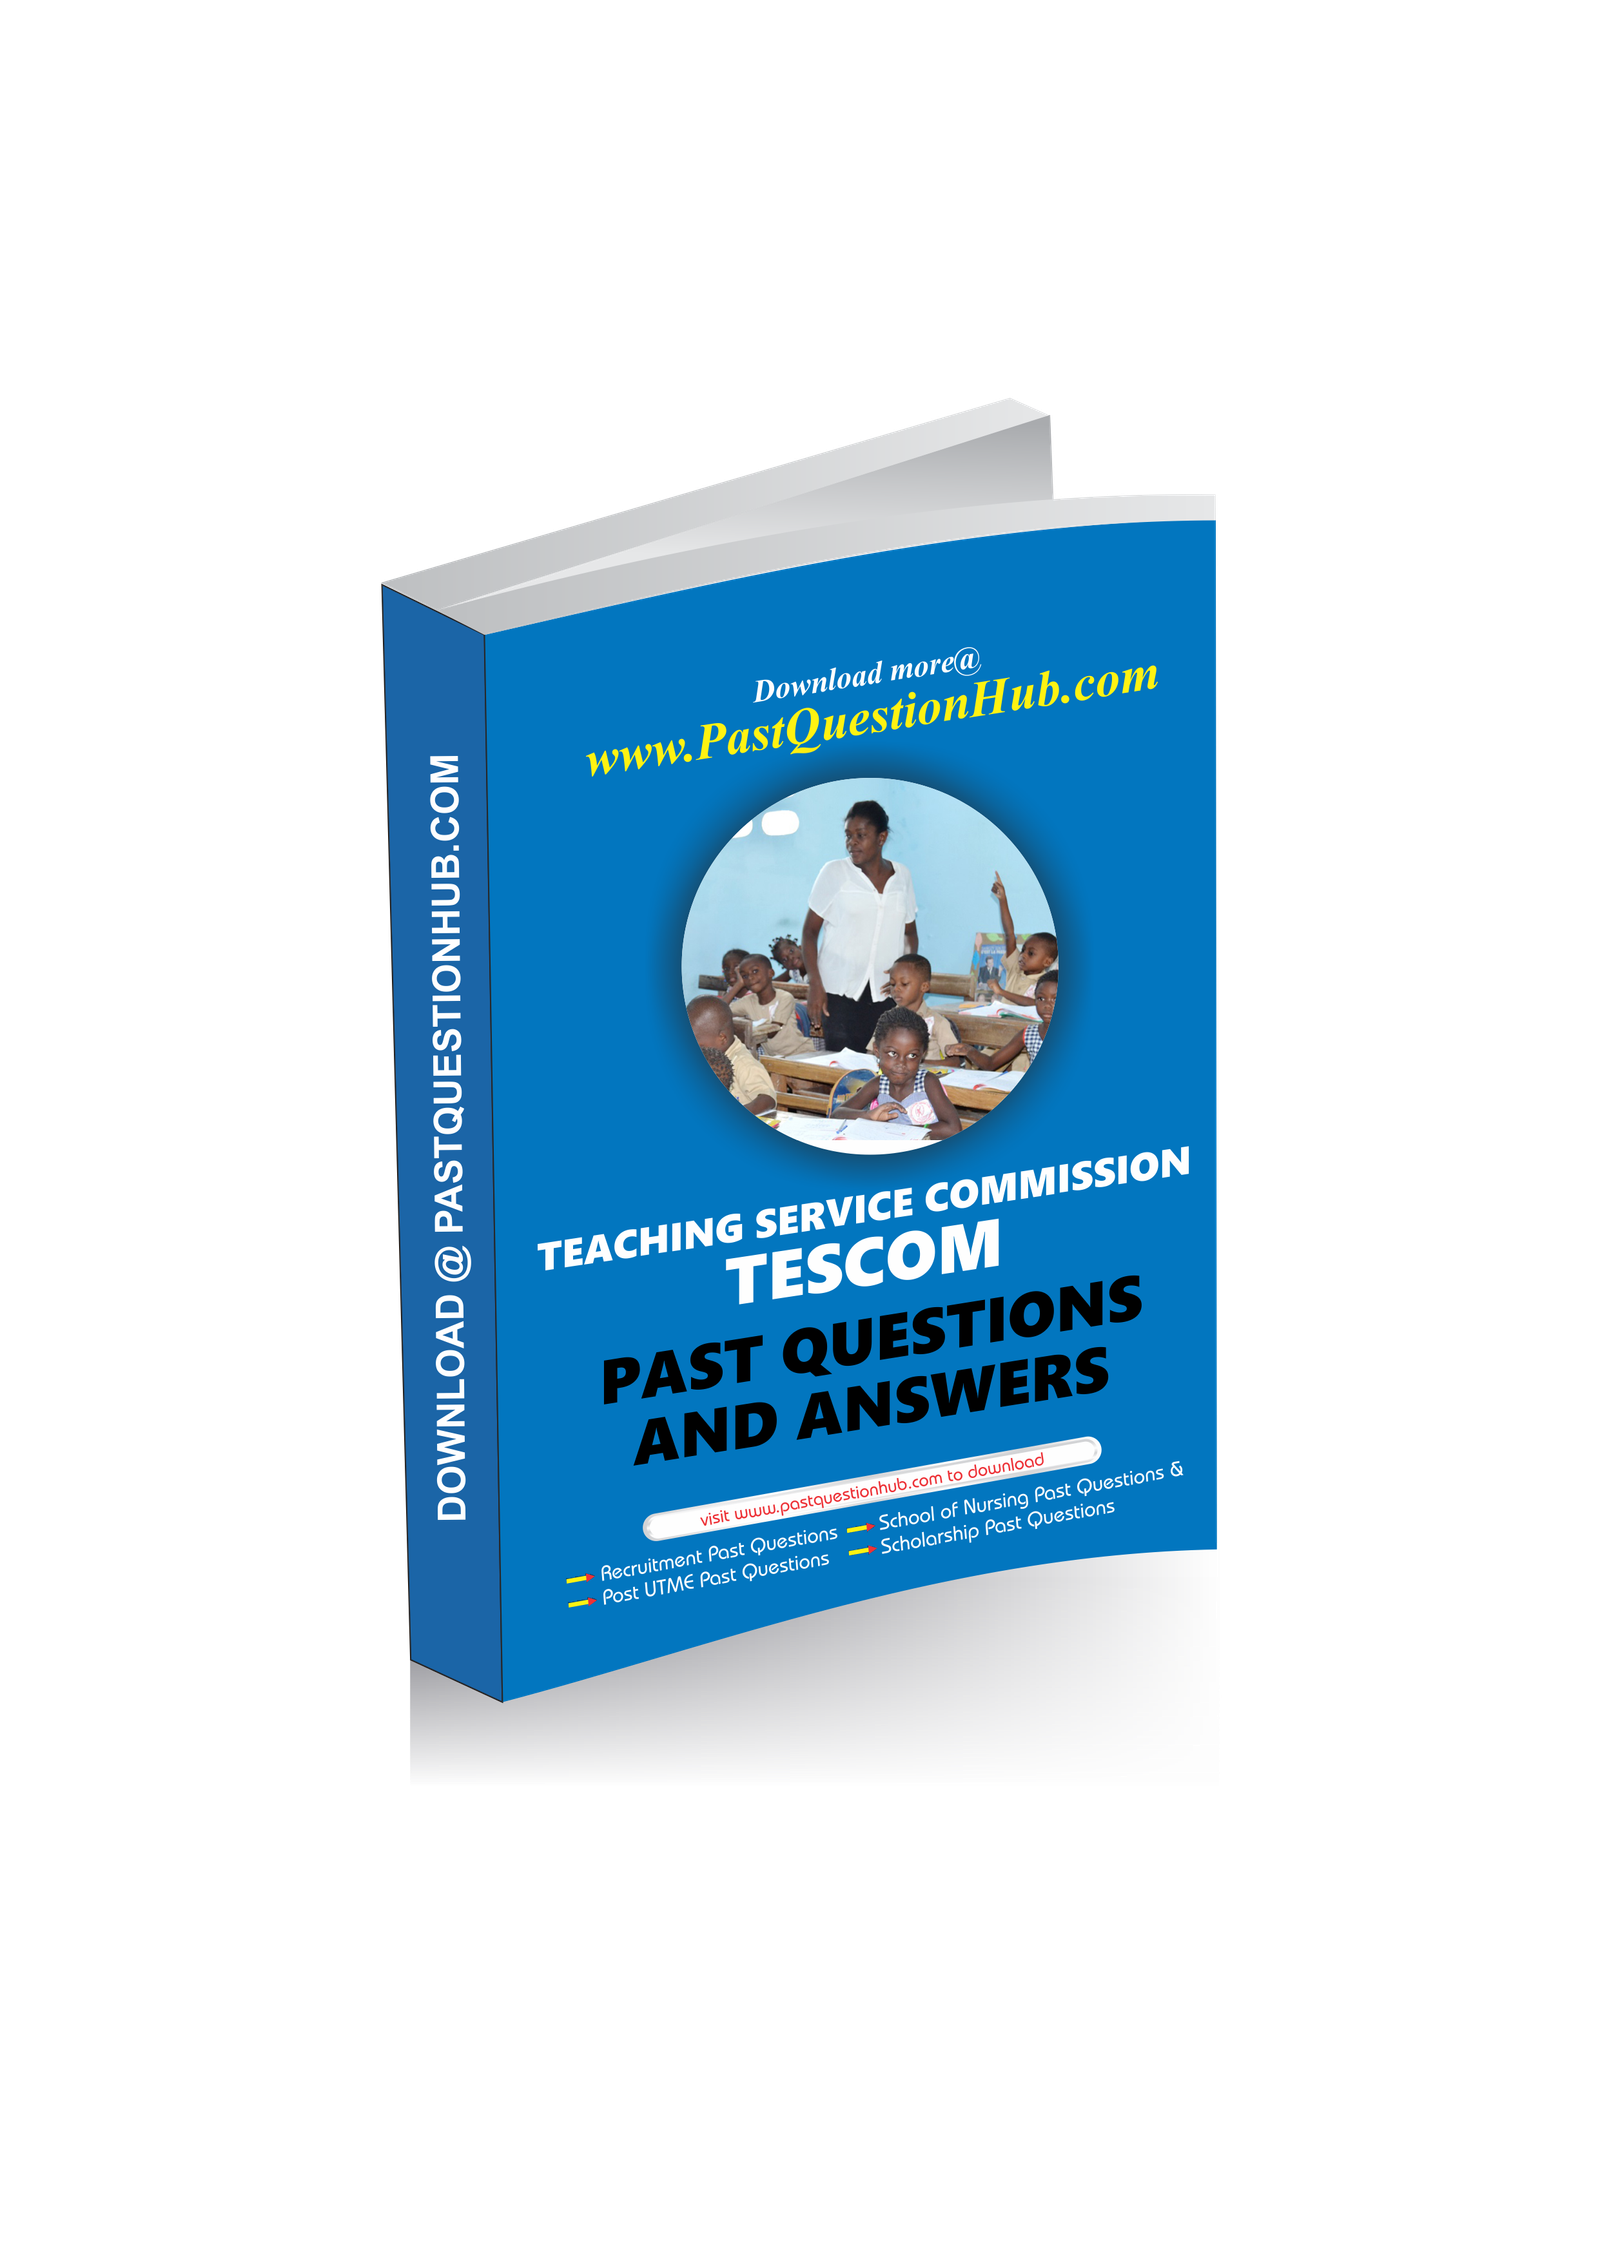 Download Latest TESCOM Past Questions and Answers PDF Here